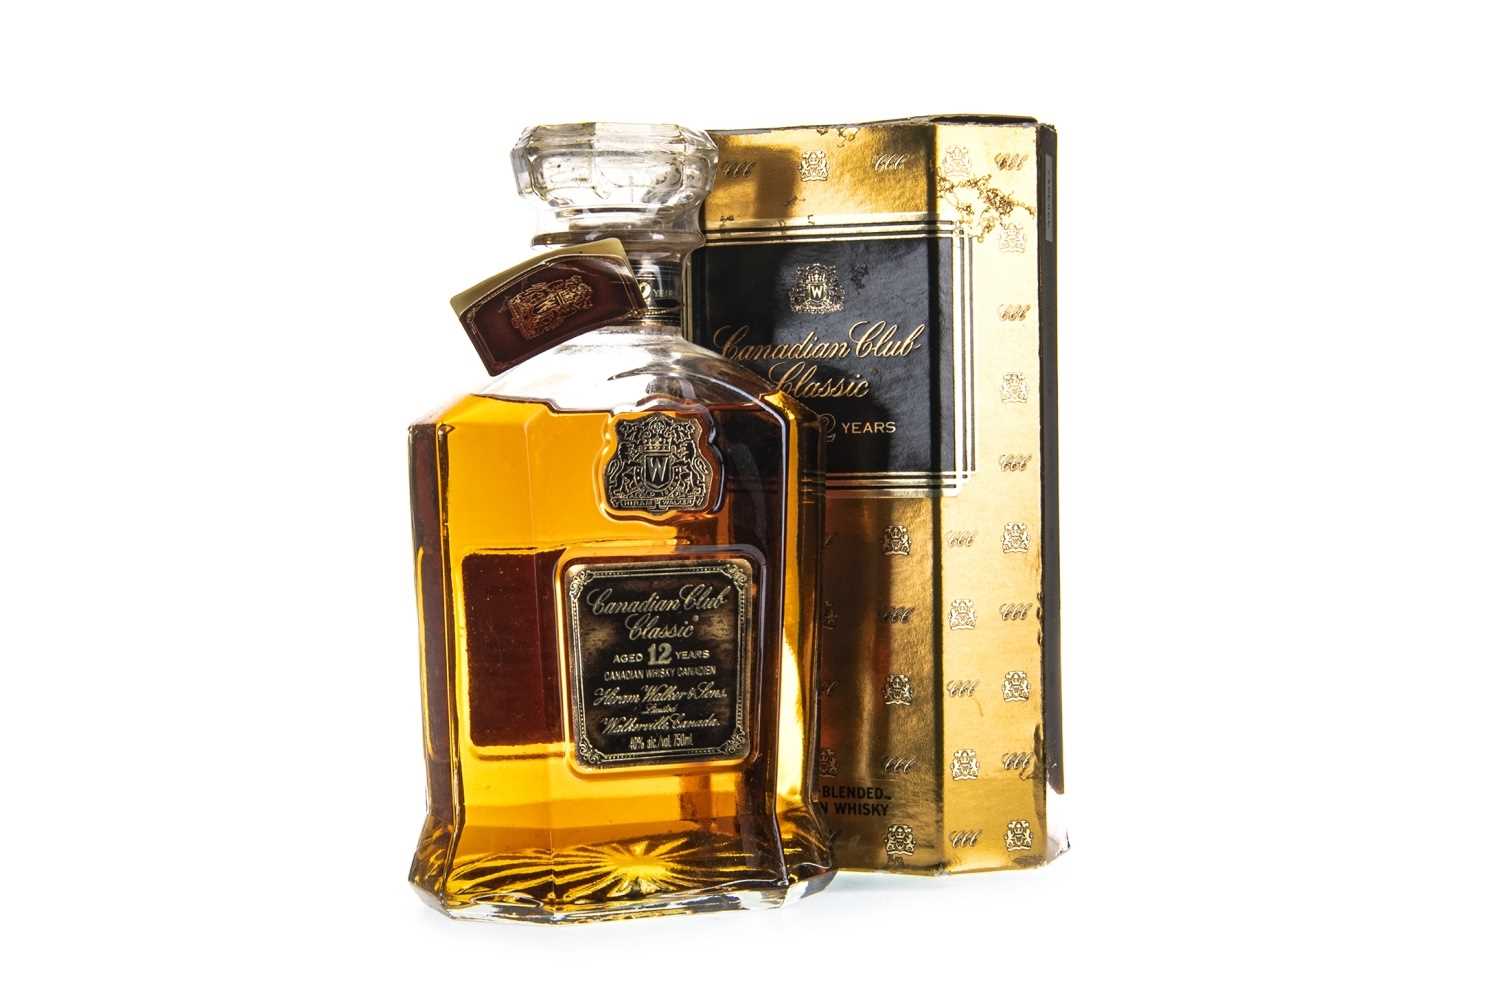 Lot 412 - CANADIAN CLUB AGED 12 YEARS